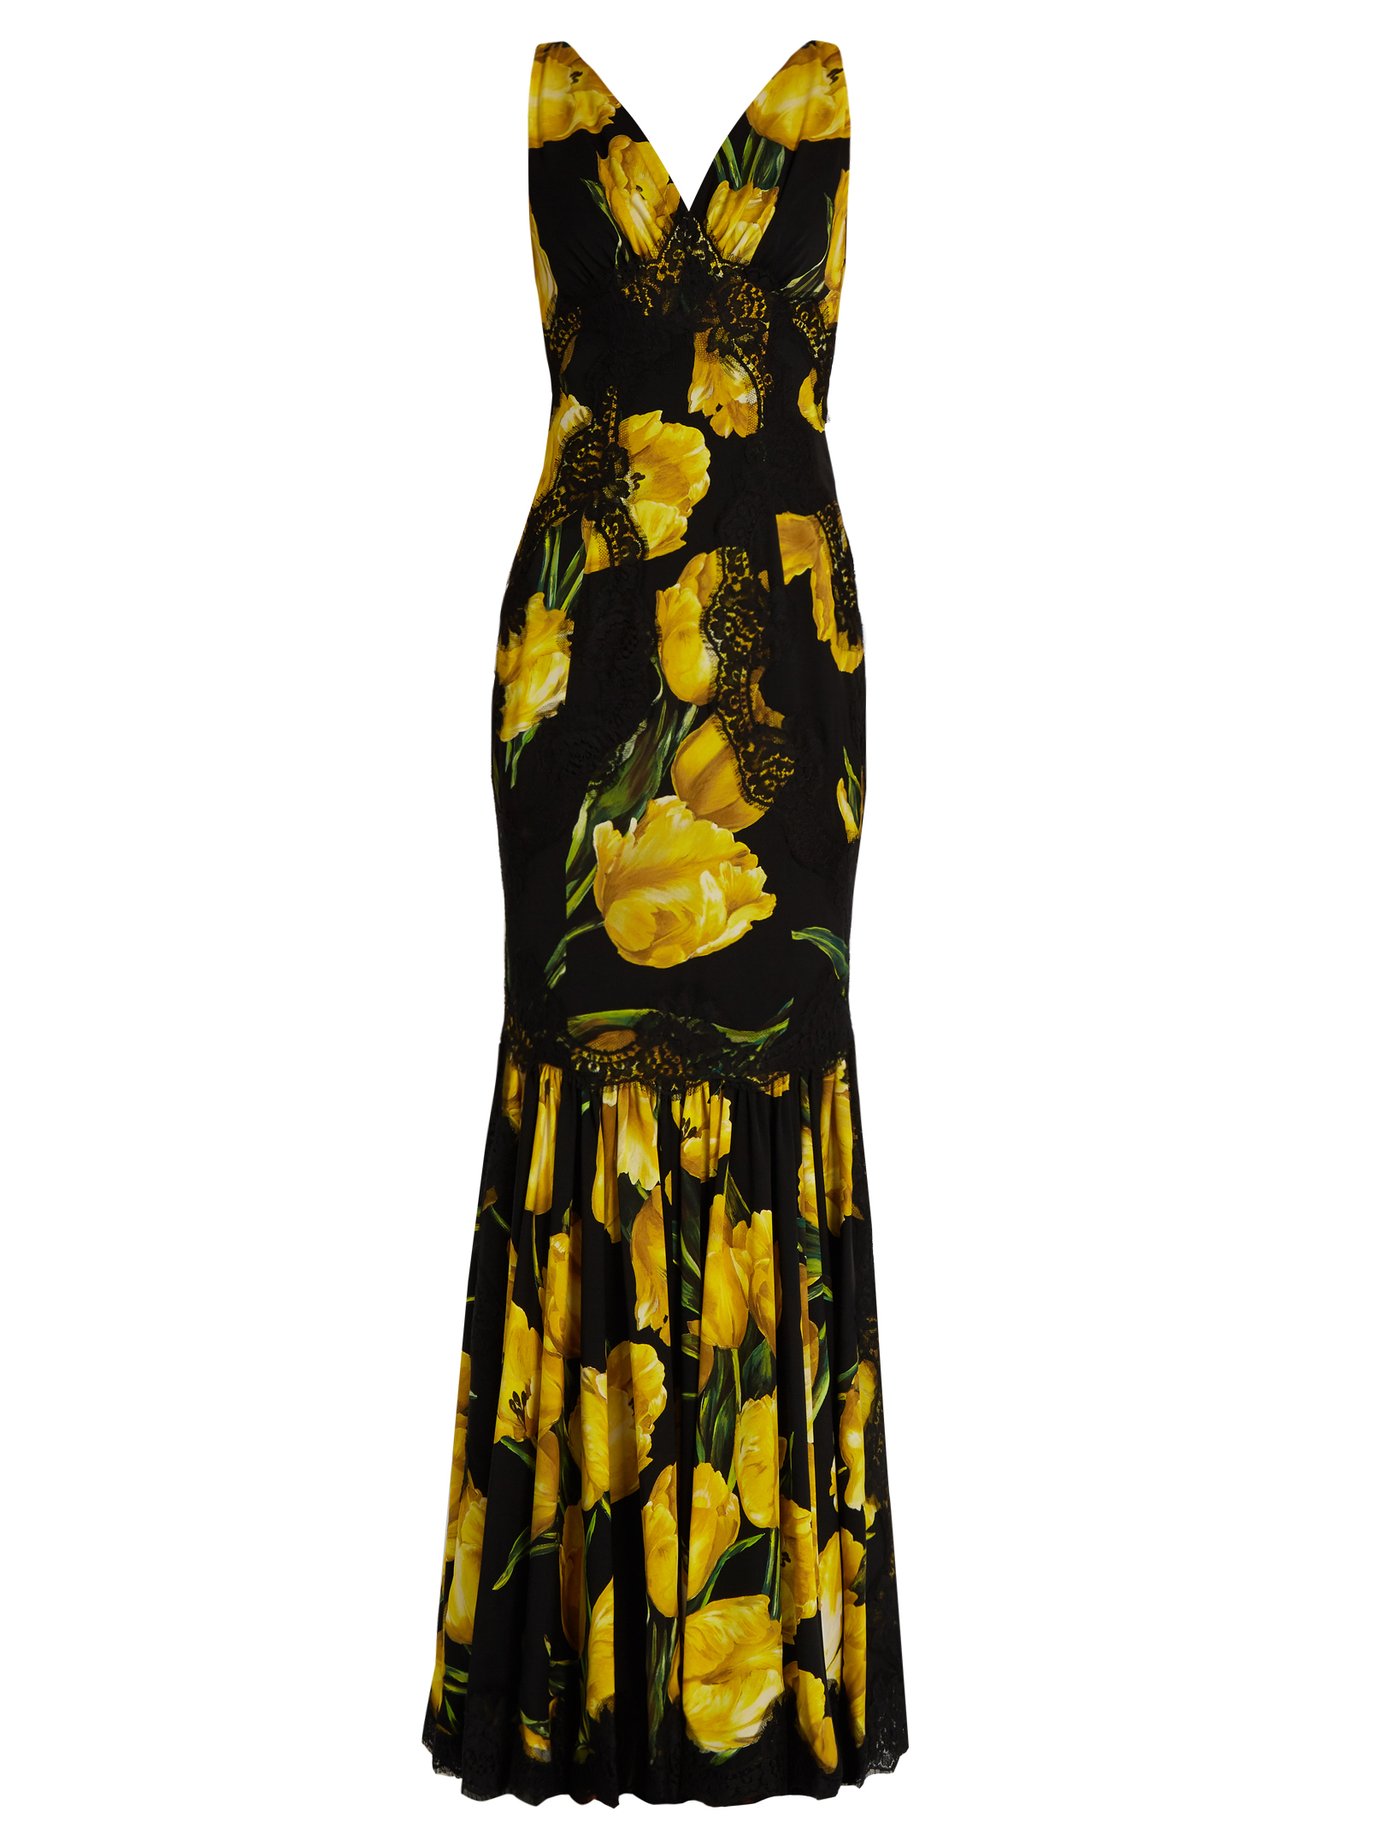 La Dolce Vita silhouettes and artistic prints collide in Dolce & Gabbana's eveningwear. This black silk-blend charmeuse gown is carefully cut to a mermaid-like silhouette that's enlivened with a painterly yellow tulip print and enhanced by contouring black floral-lace inserts. Let the dramatic fluted skirt swish playfully over seductive stilettos.